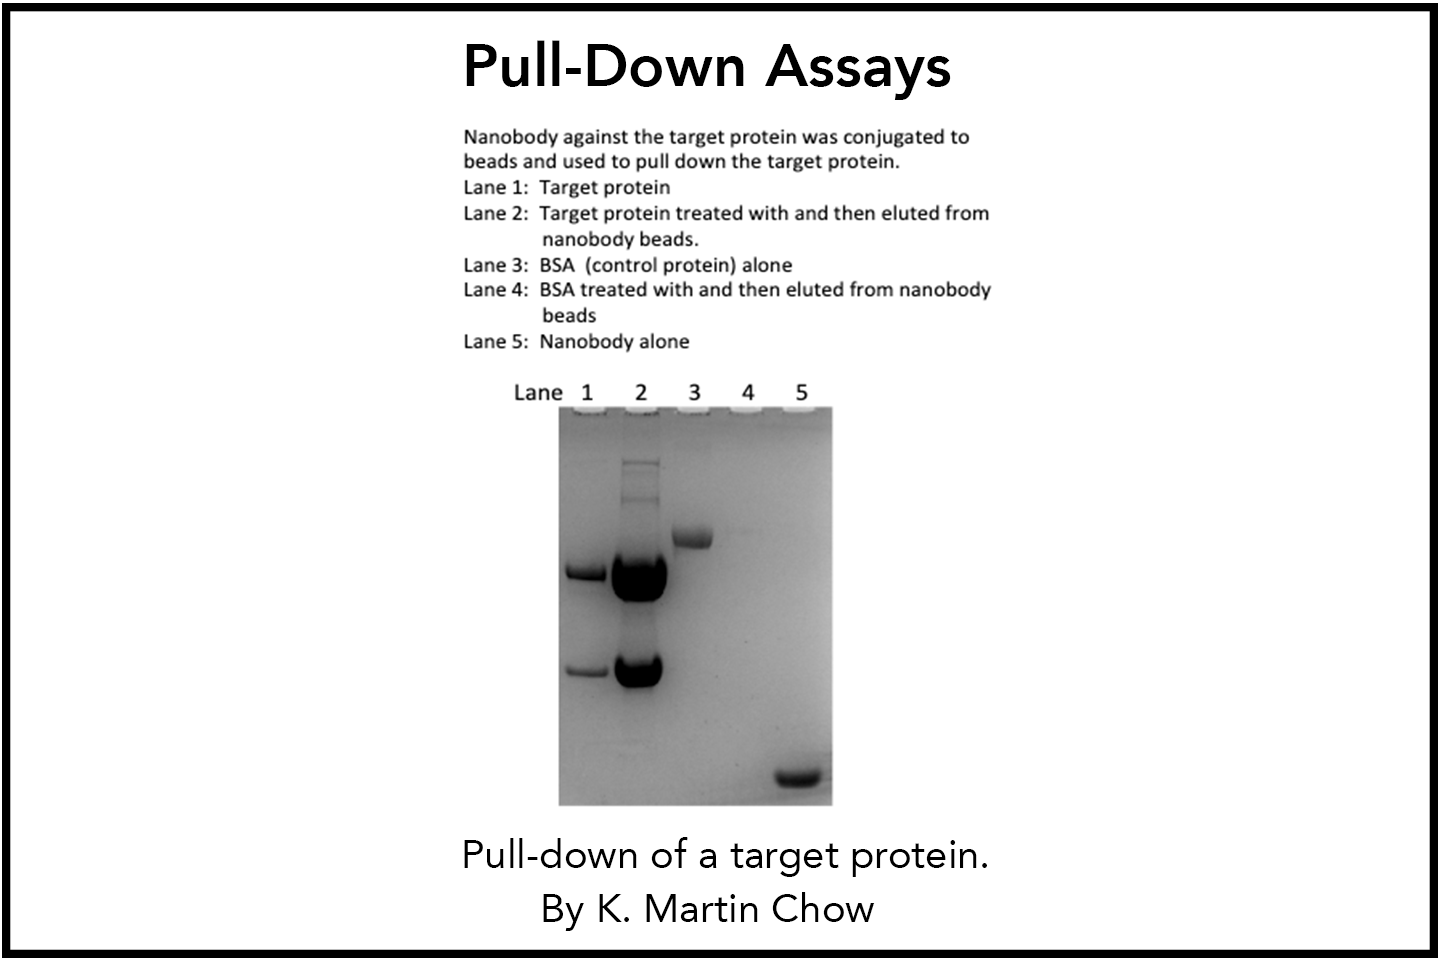 Pull-Down Assays: Nanobody against the target protein was conjugated to beads and used to pull down the target protein.